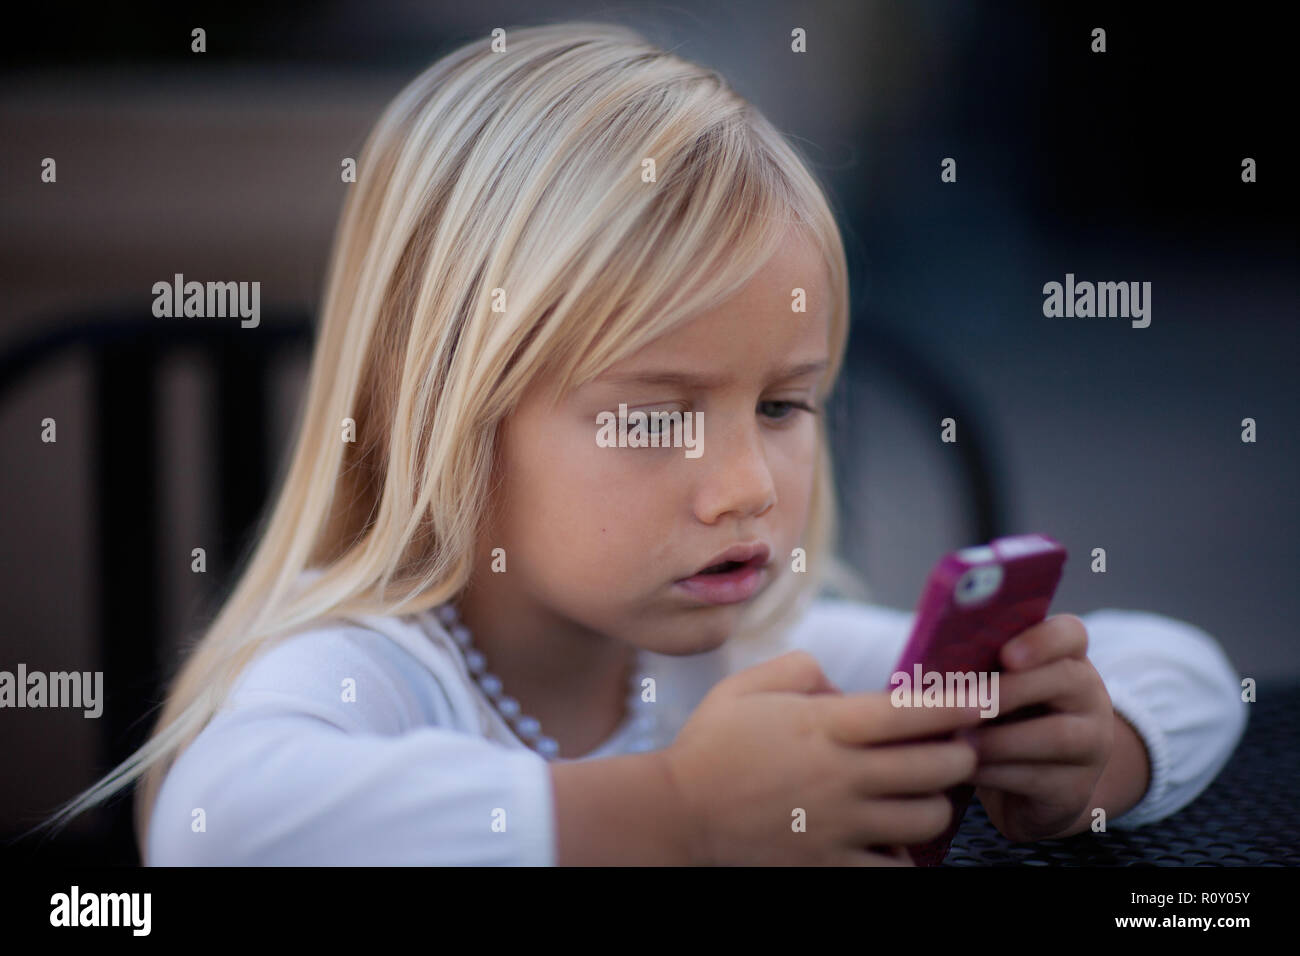 Young blond girl looking at pink cell phone with an intense look on her face. Stock Photo